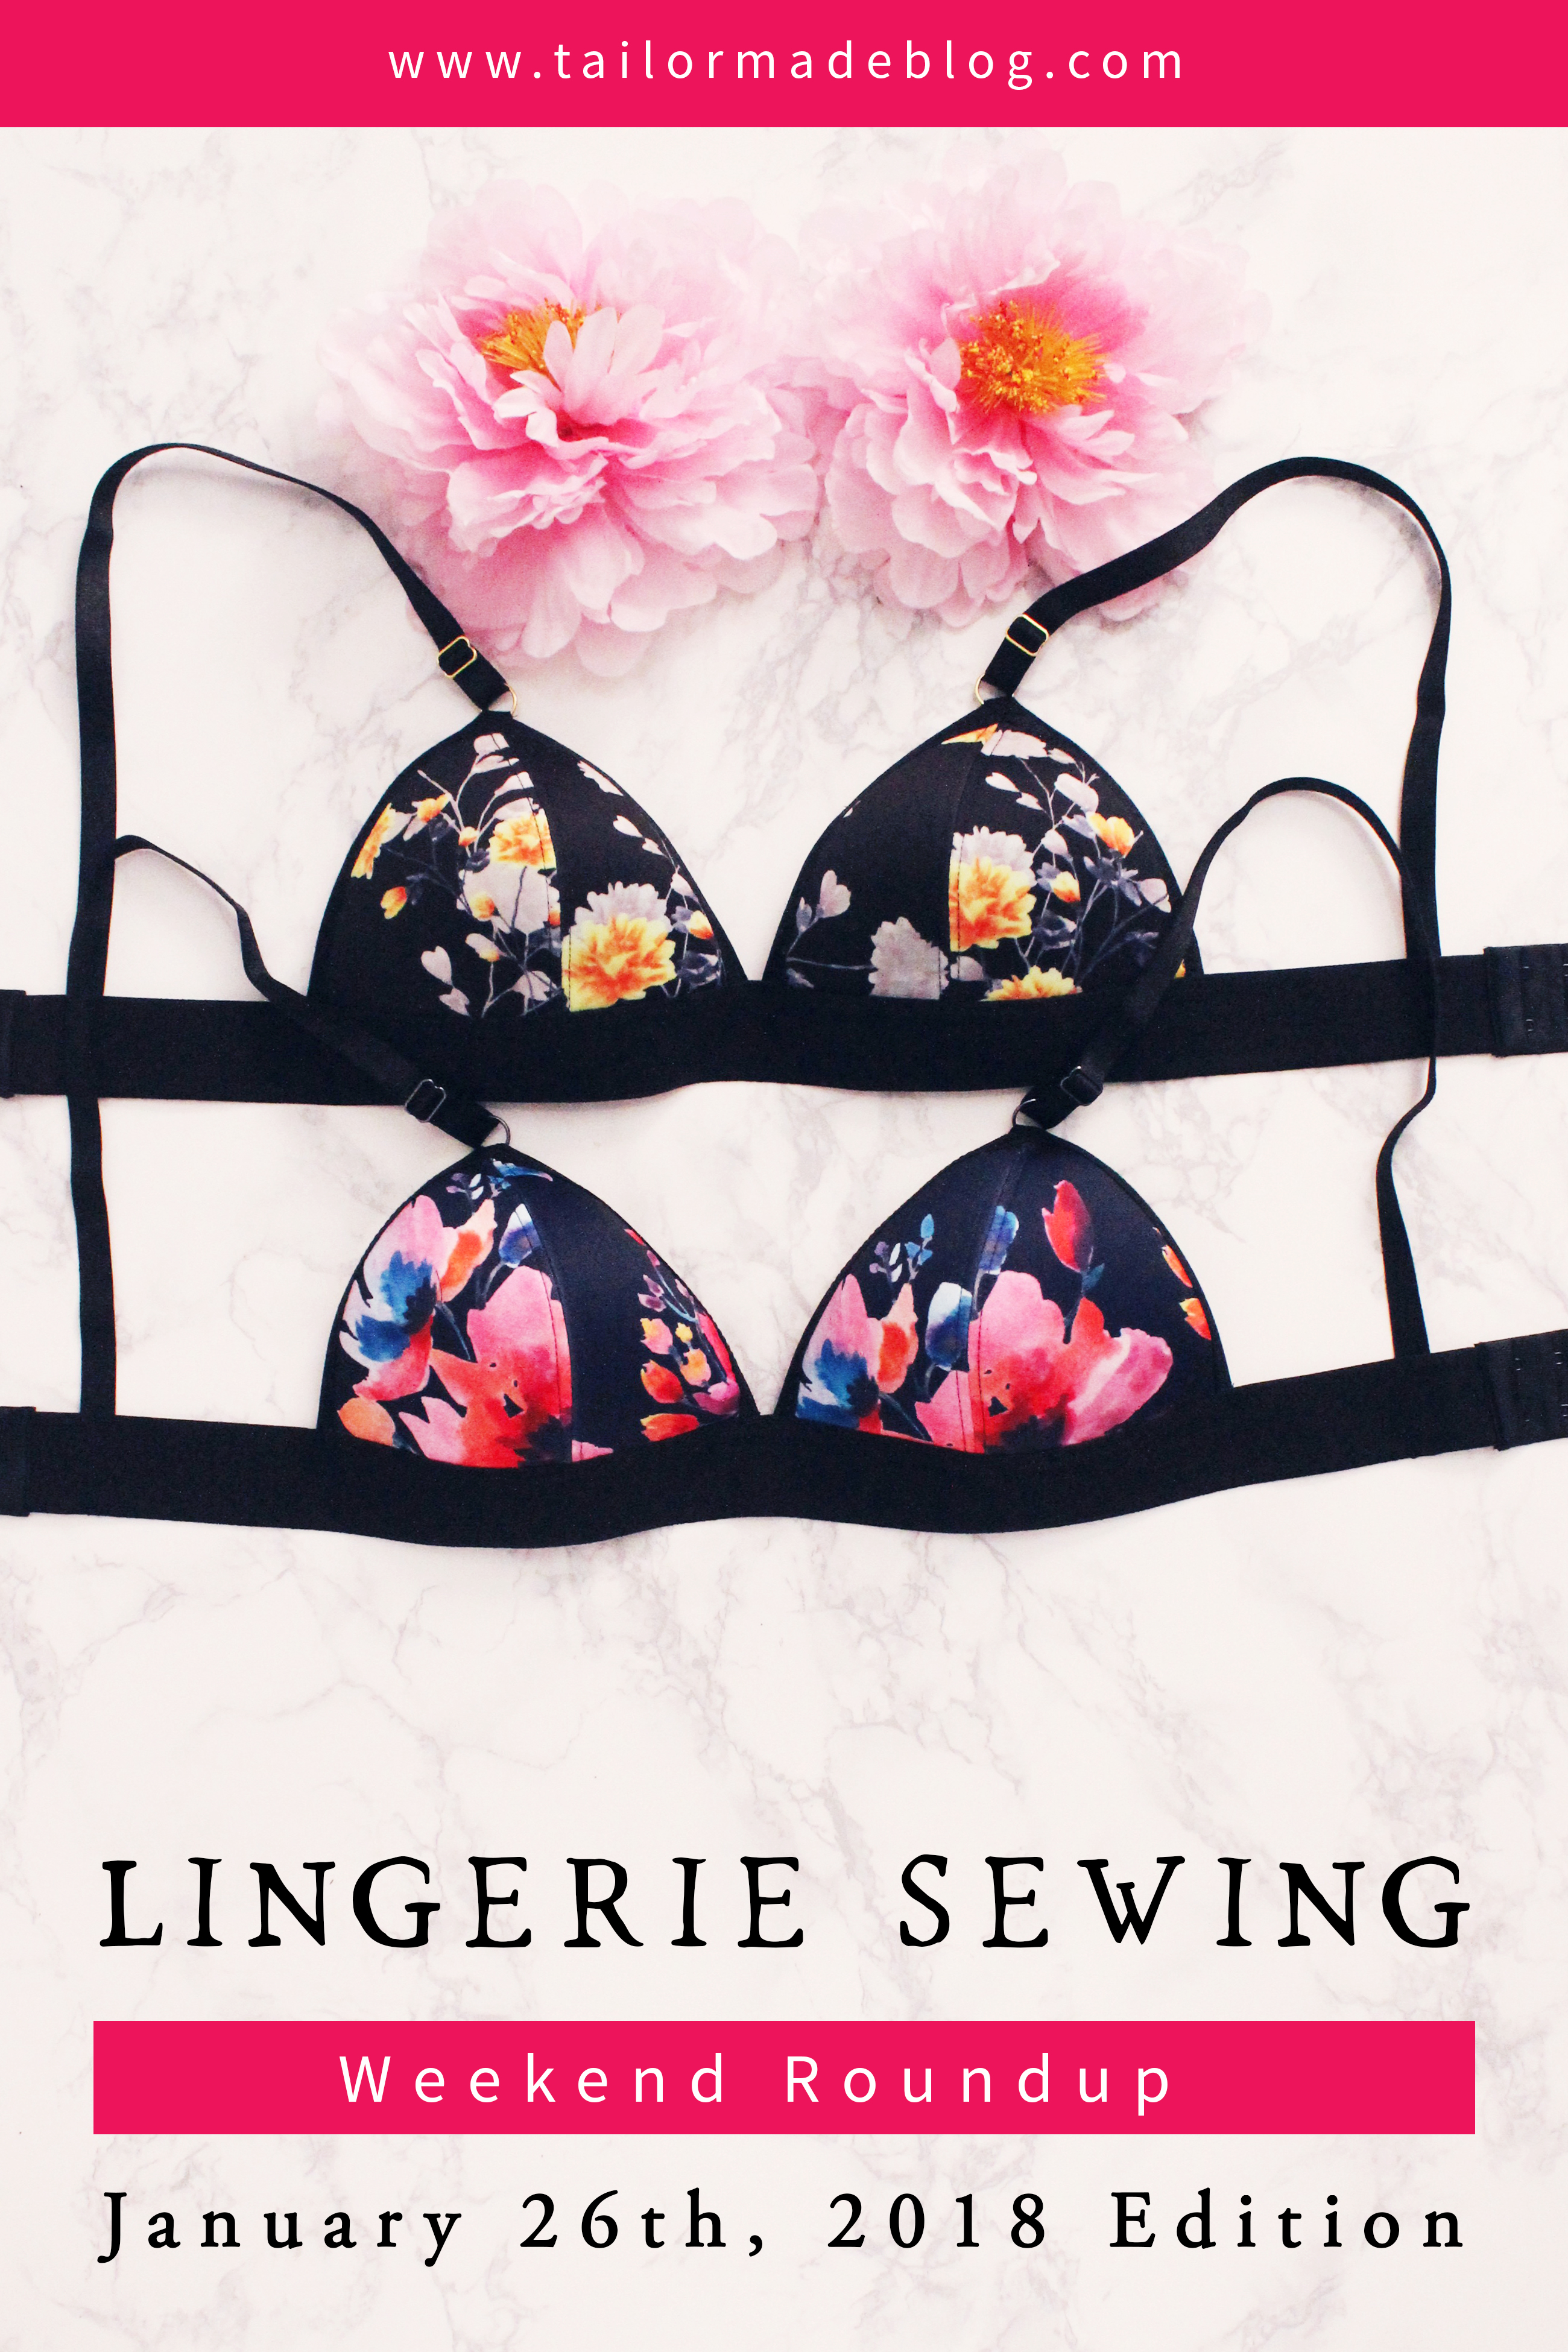 01-26-18-weekend-round-up Lingerie Sewing Weekend Round Up Catch up on the latest news in the lingerie seiwng community!